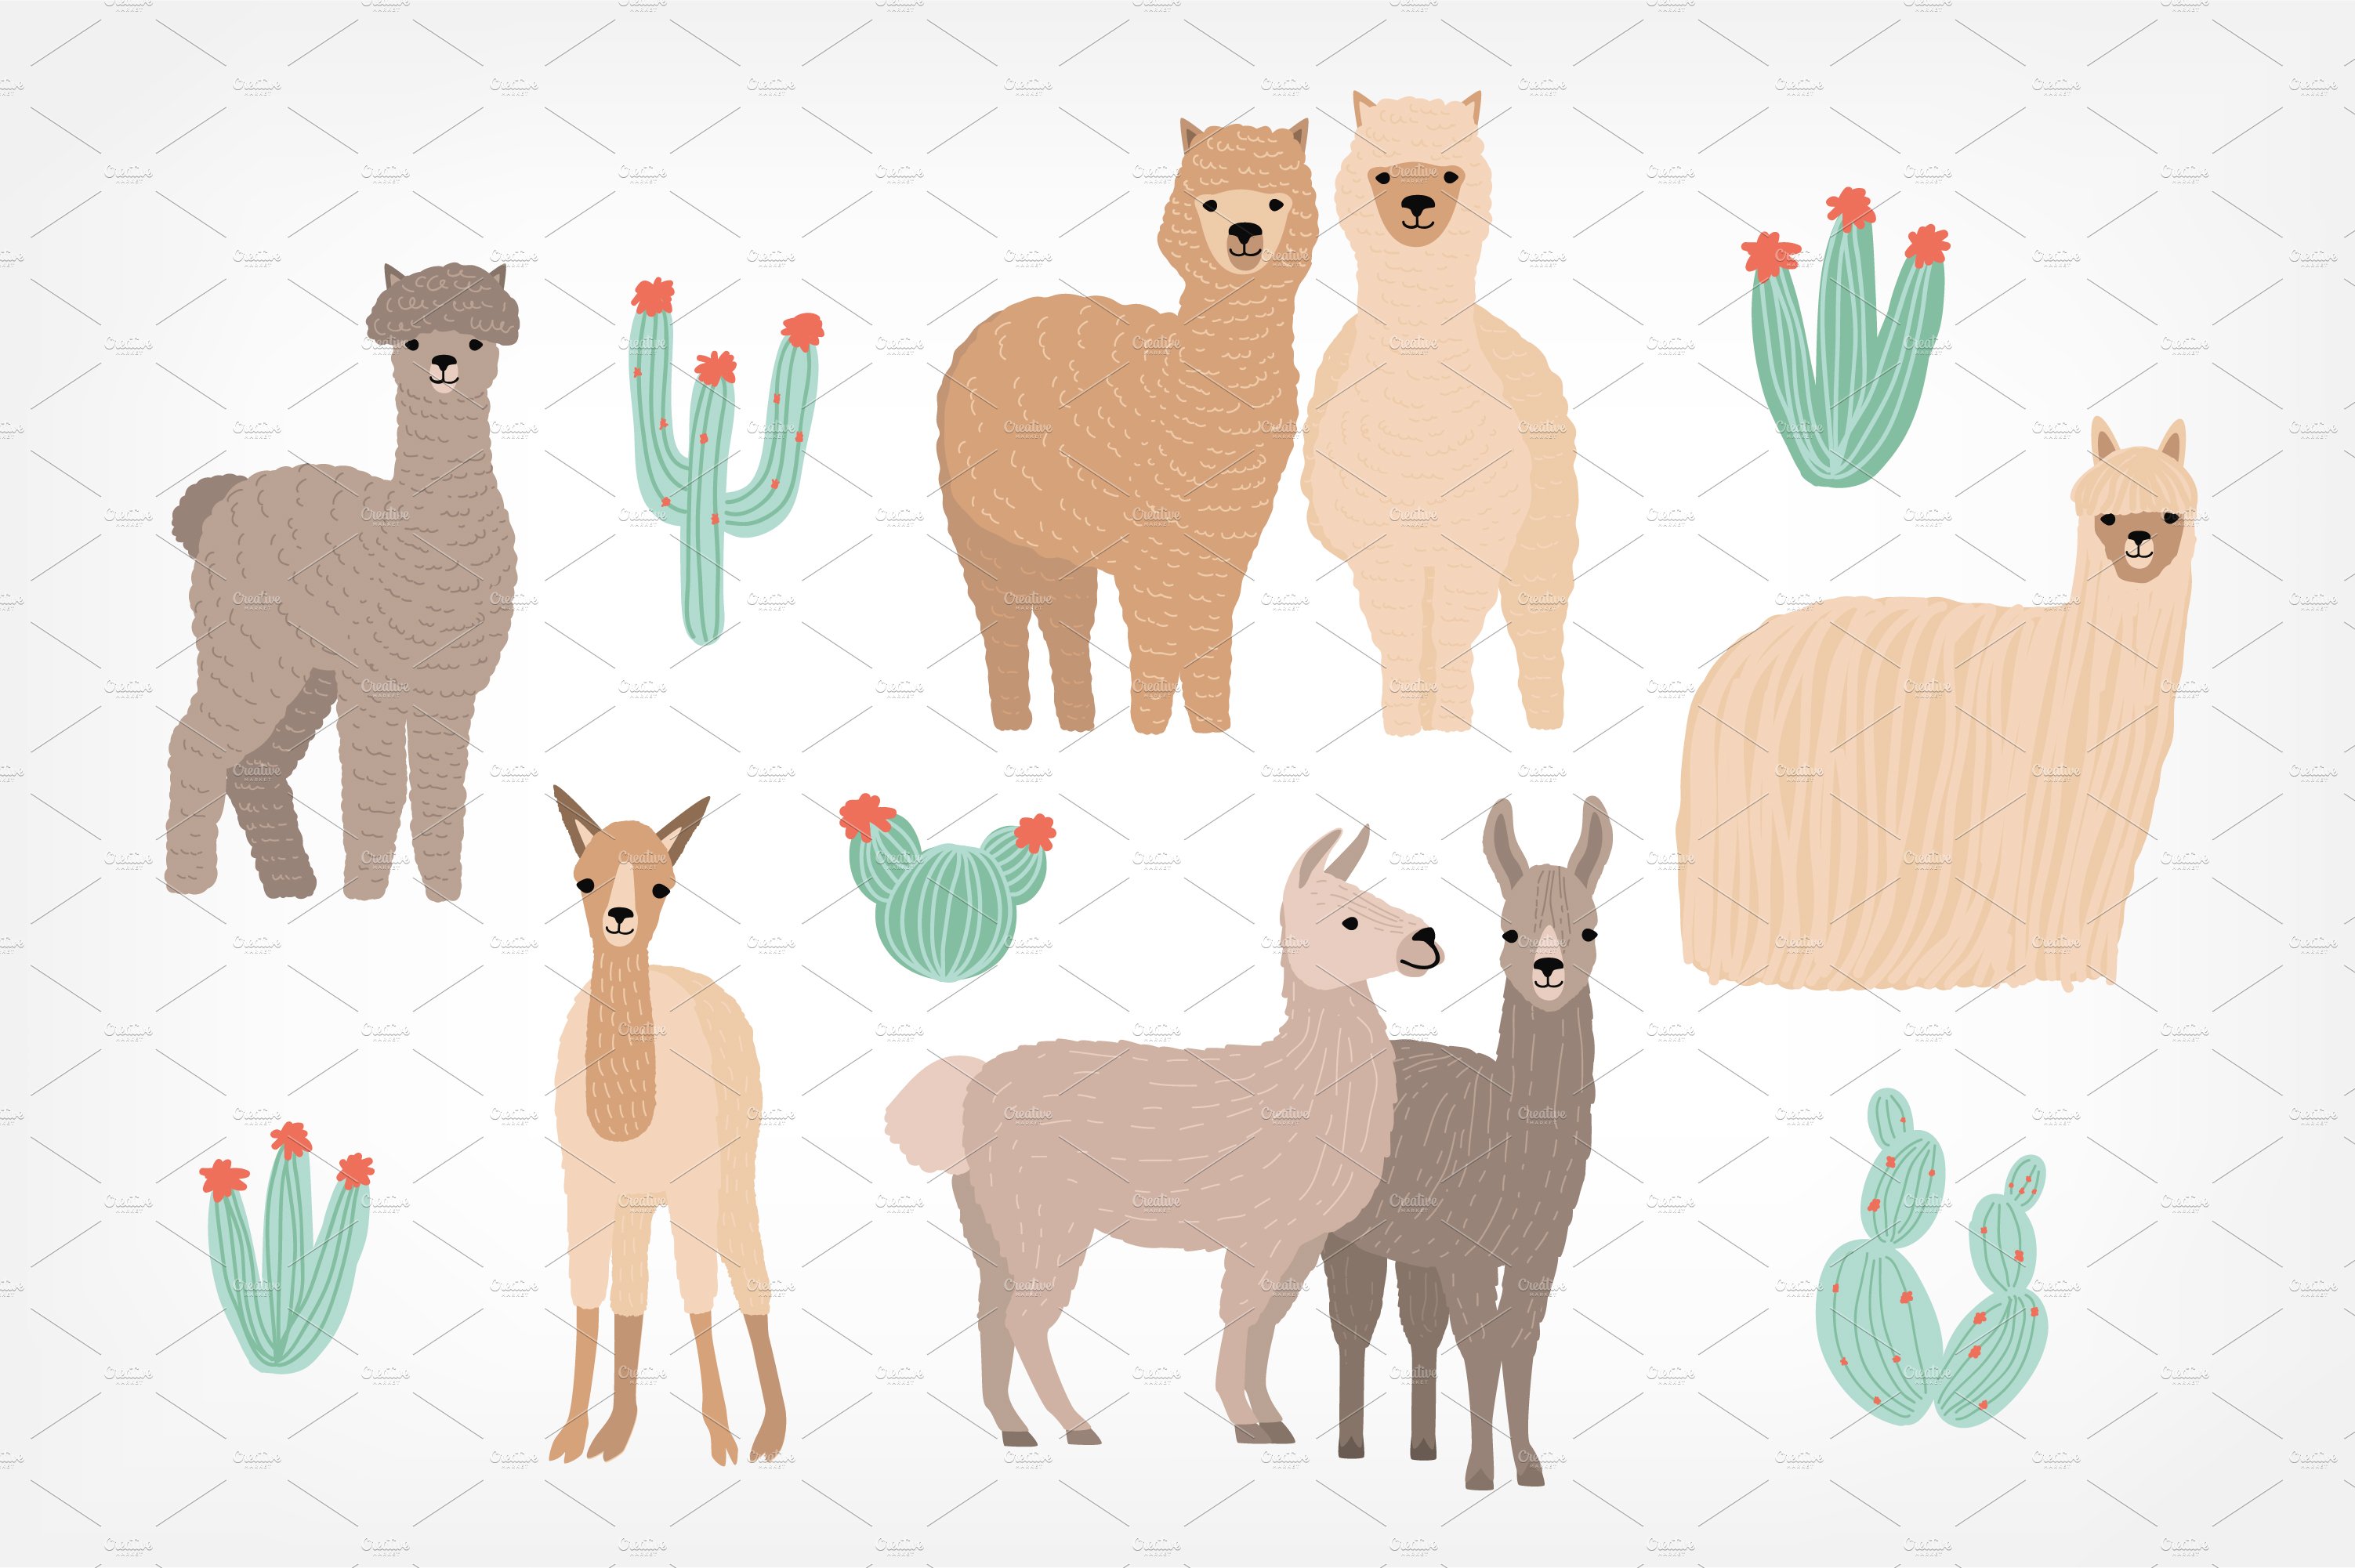 Adorable llamas and cactuses preview image.